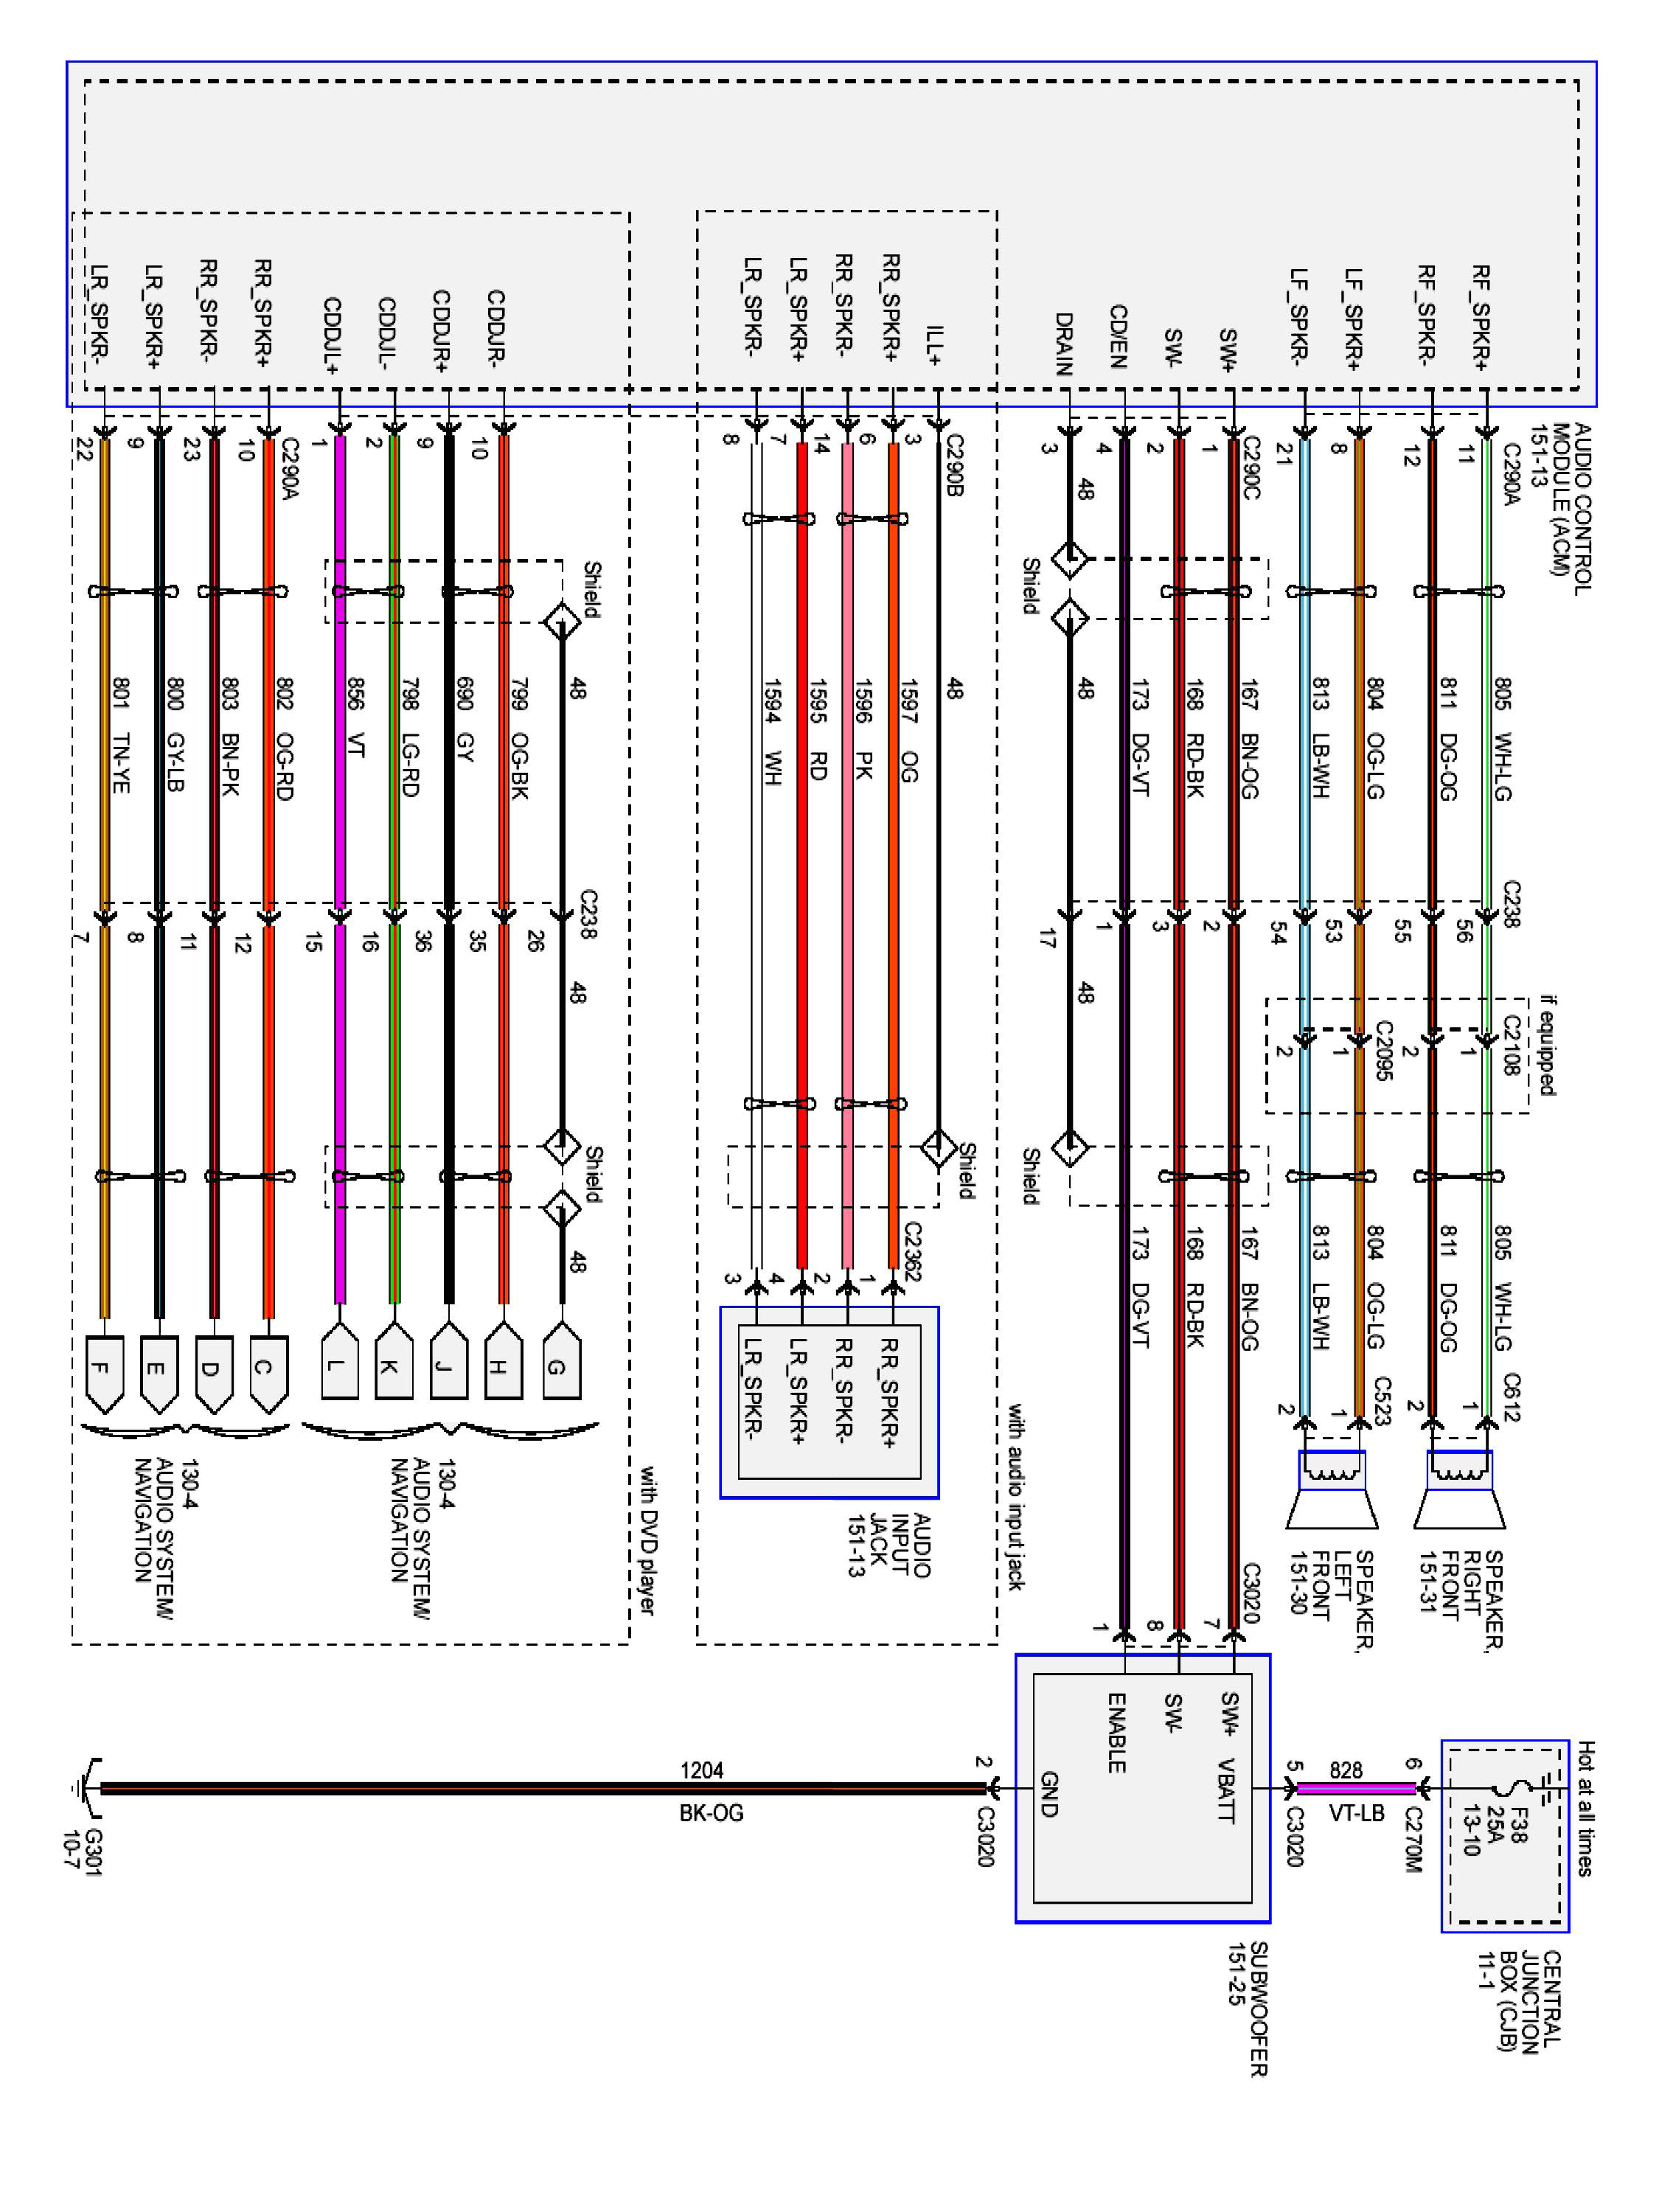 2004 ford ranger stereo wiring diagram wiring diagram paper 07 ford ranger radio wiring wiring diagram